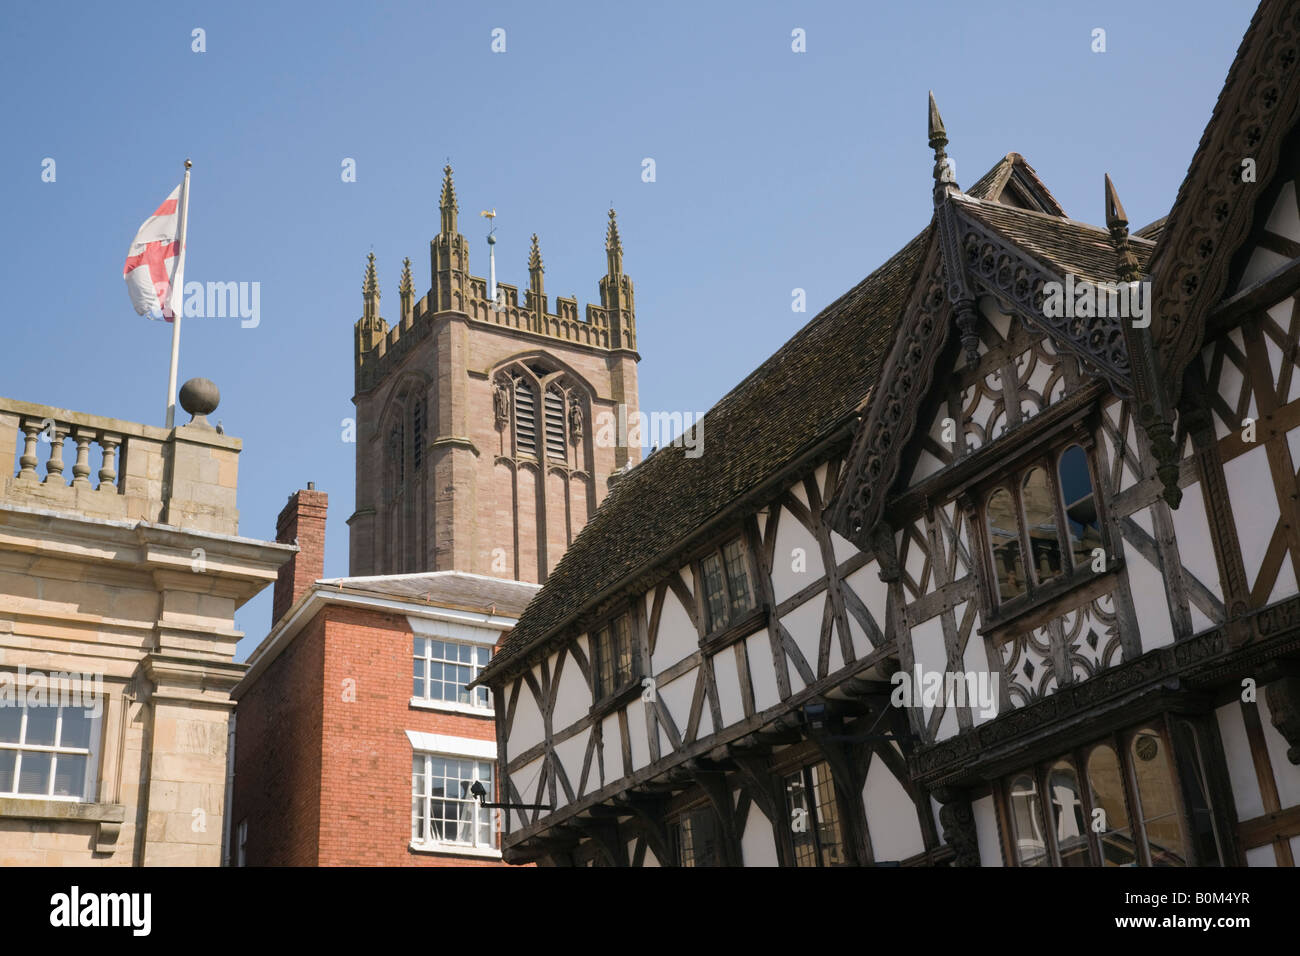 Ludlow Shropshire West Midlands England UK Black and white timber framed medieval building with church of St Laurence tower Stock Photo